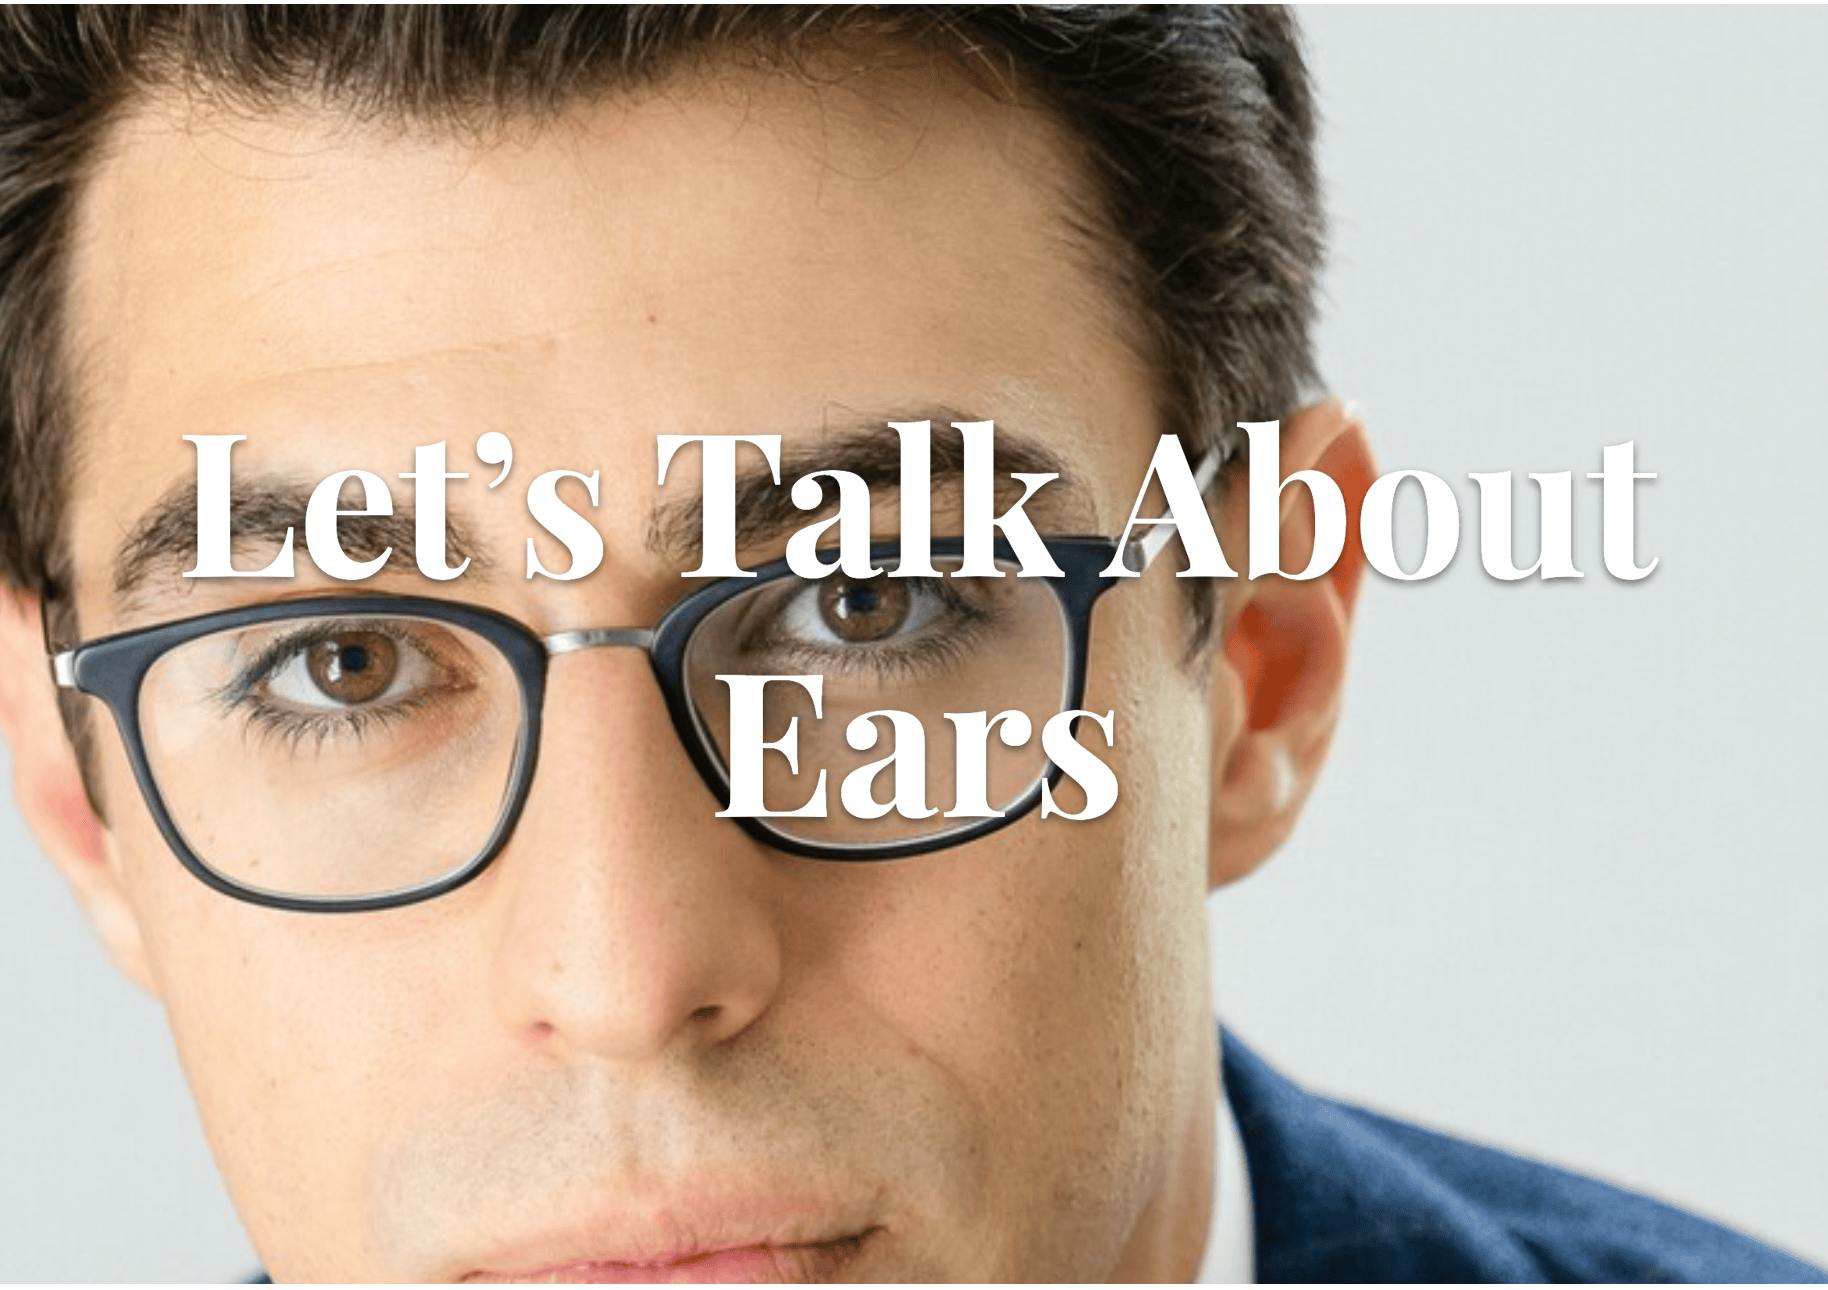 Let’s Talk About Ears